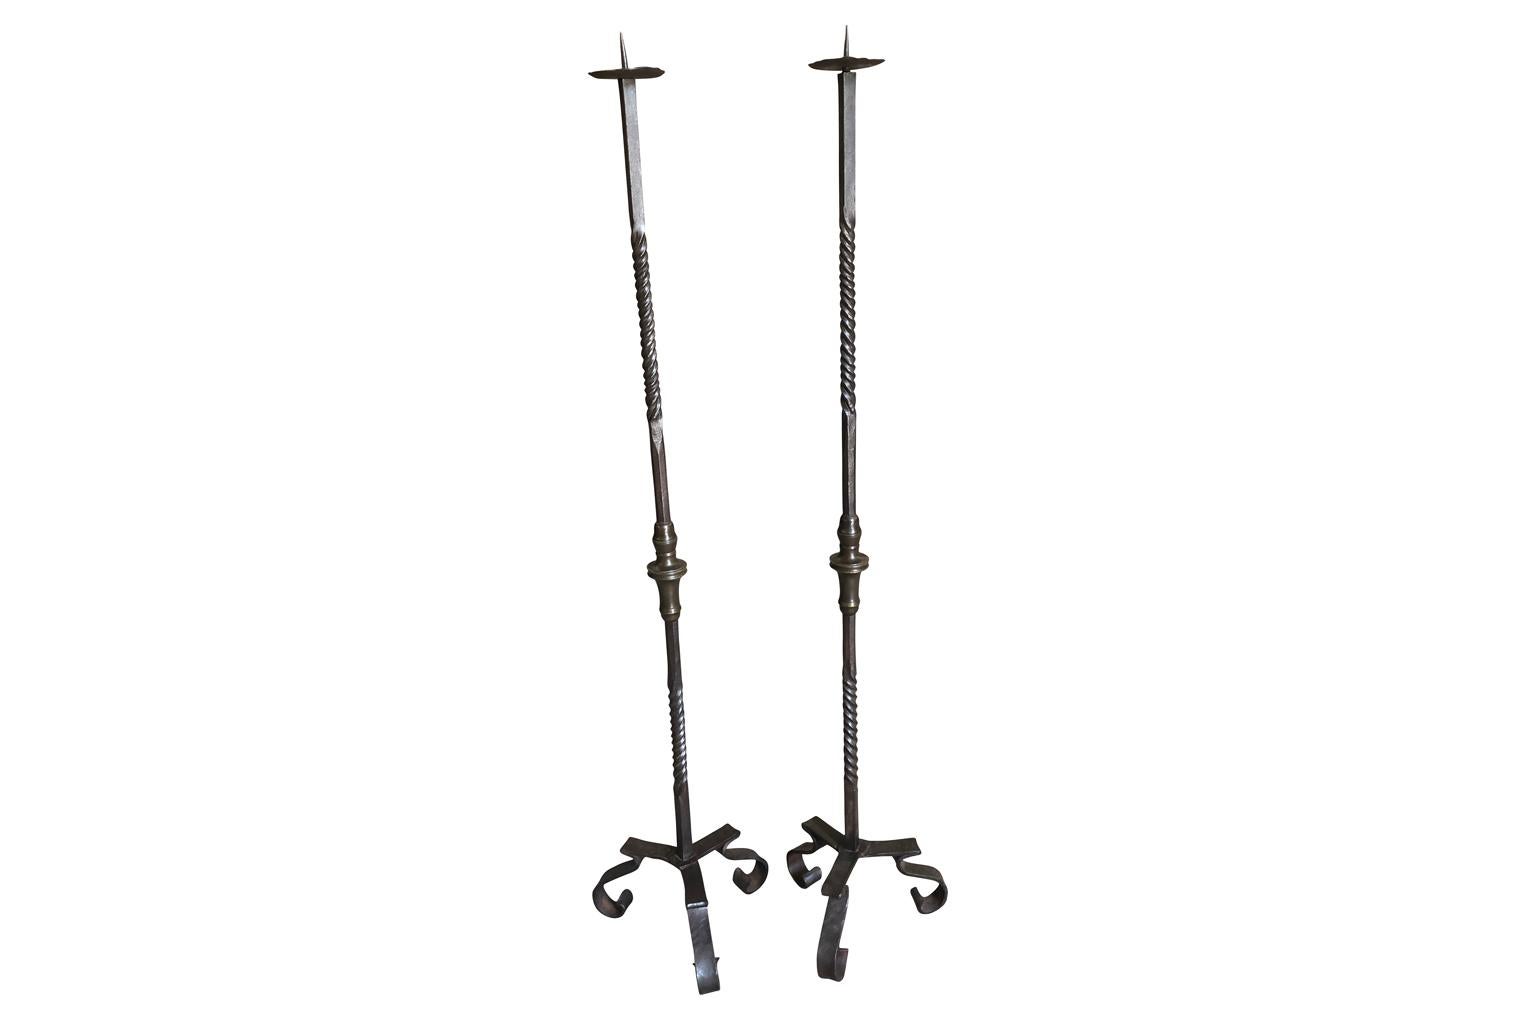 A very handsome pair of later 18th century Torcheres in hand forged iron and bronze. Beautiful patina. Perfect for candles or electrified as floor lamps.